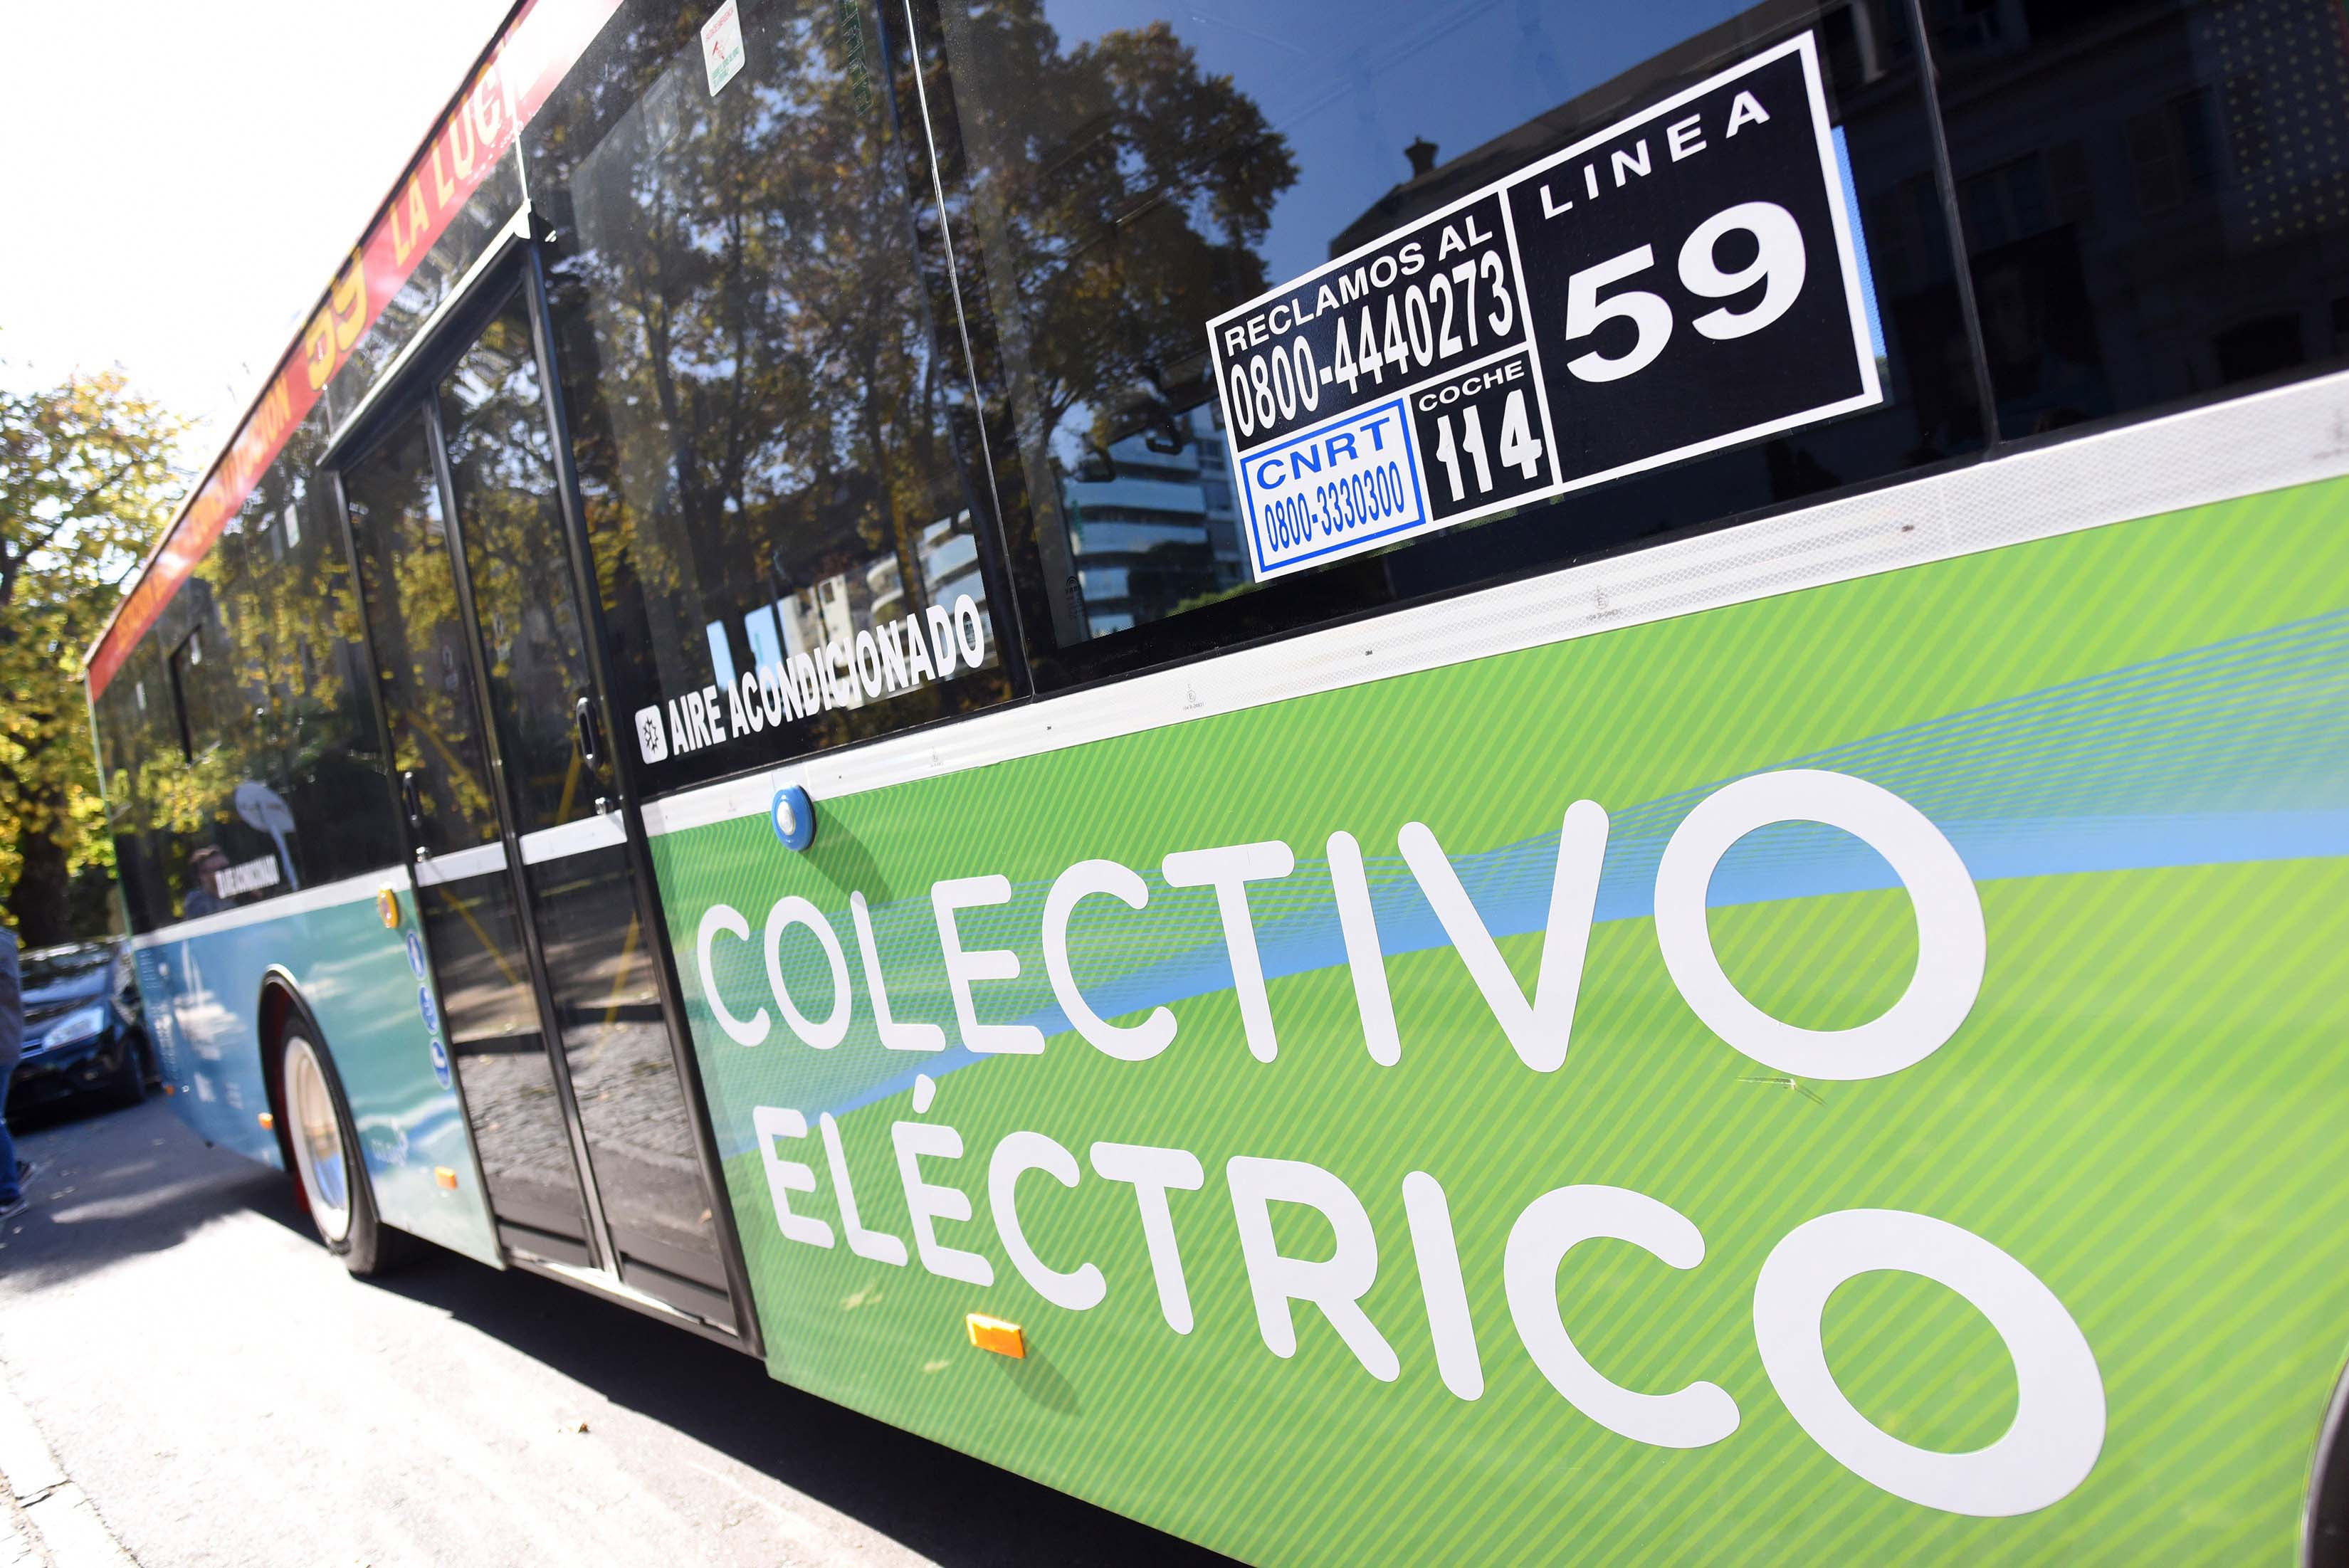 ColectivoElectrico